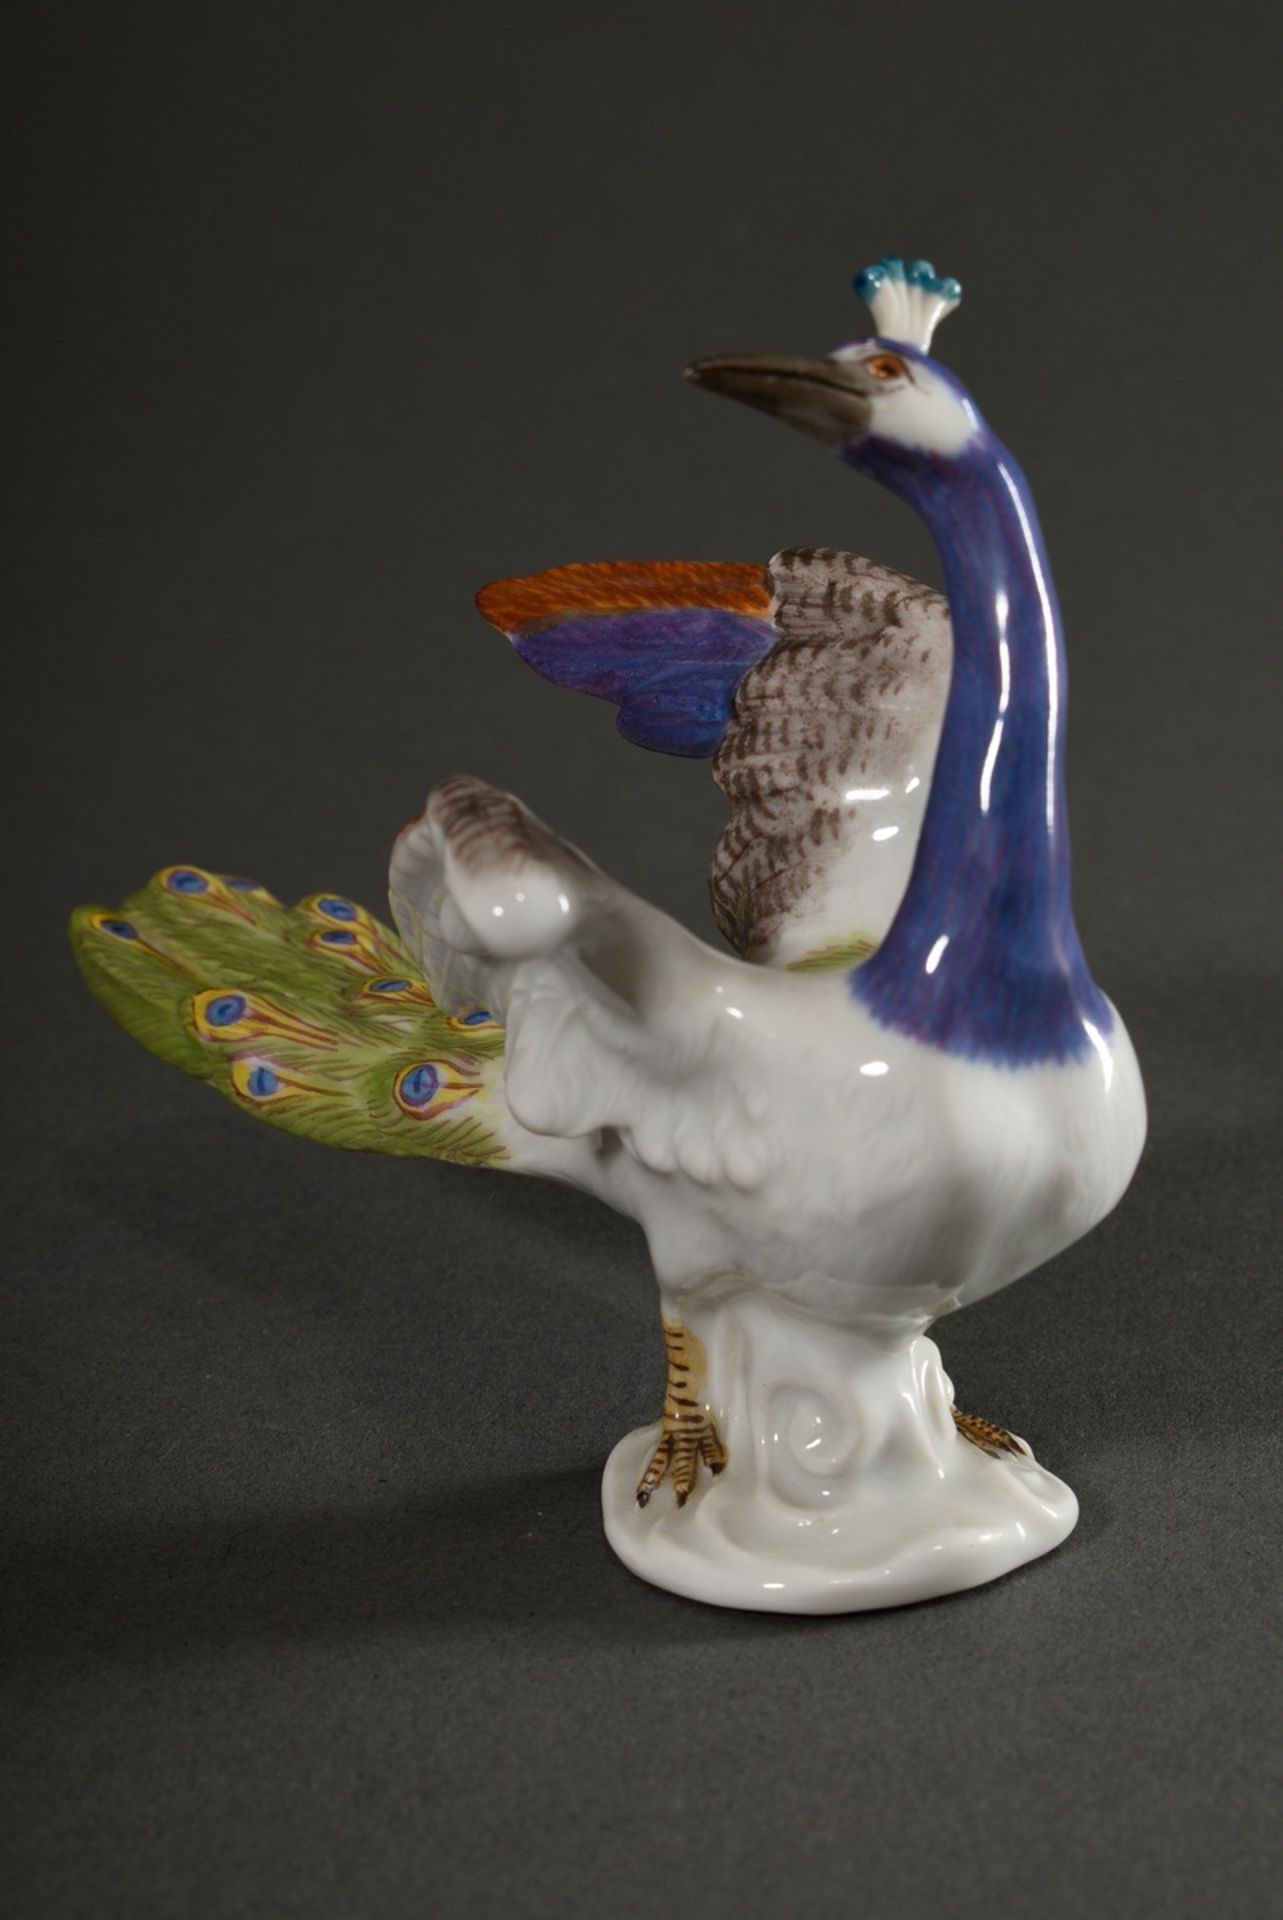 Small Meissen figure "Peacock", polychrome painted, model no.: 7719, form no.: 95, year: 1978, 9x11 - Image 5 of 8